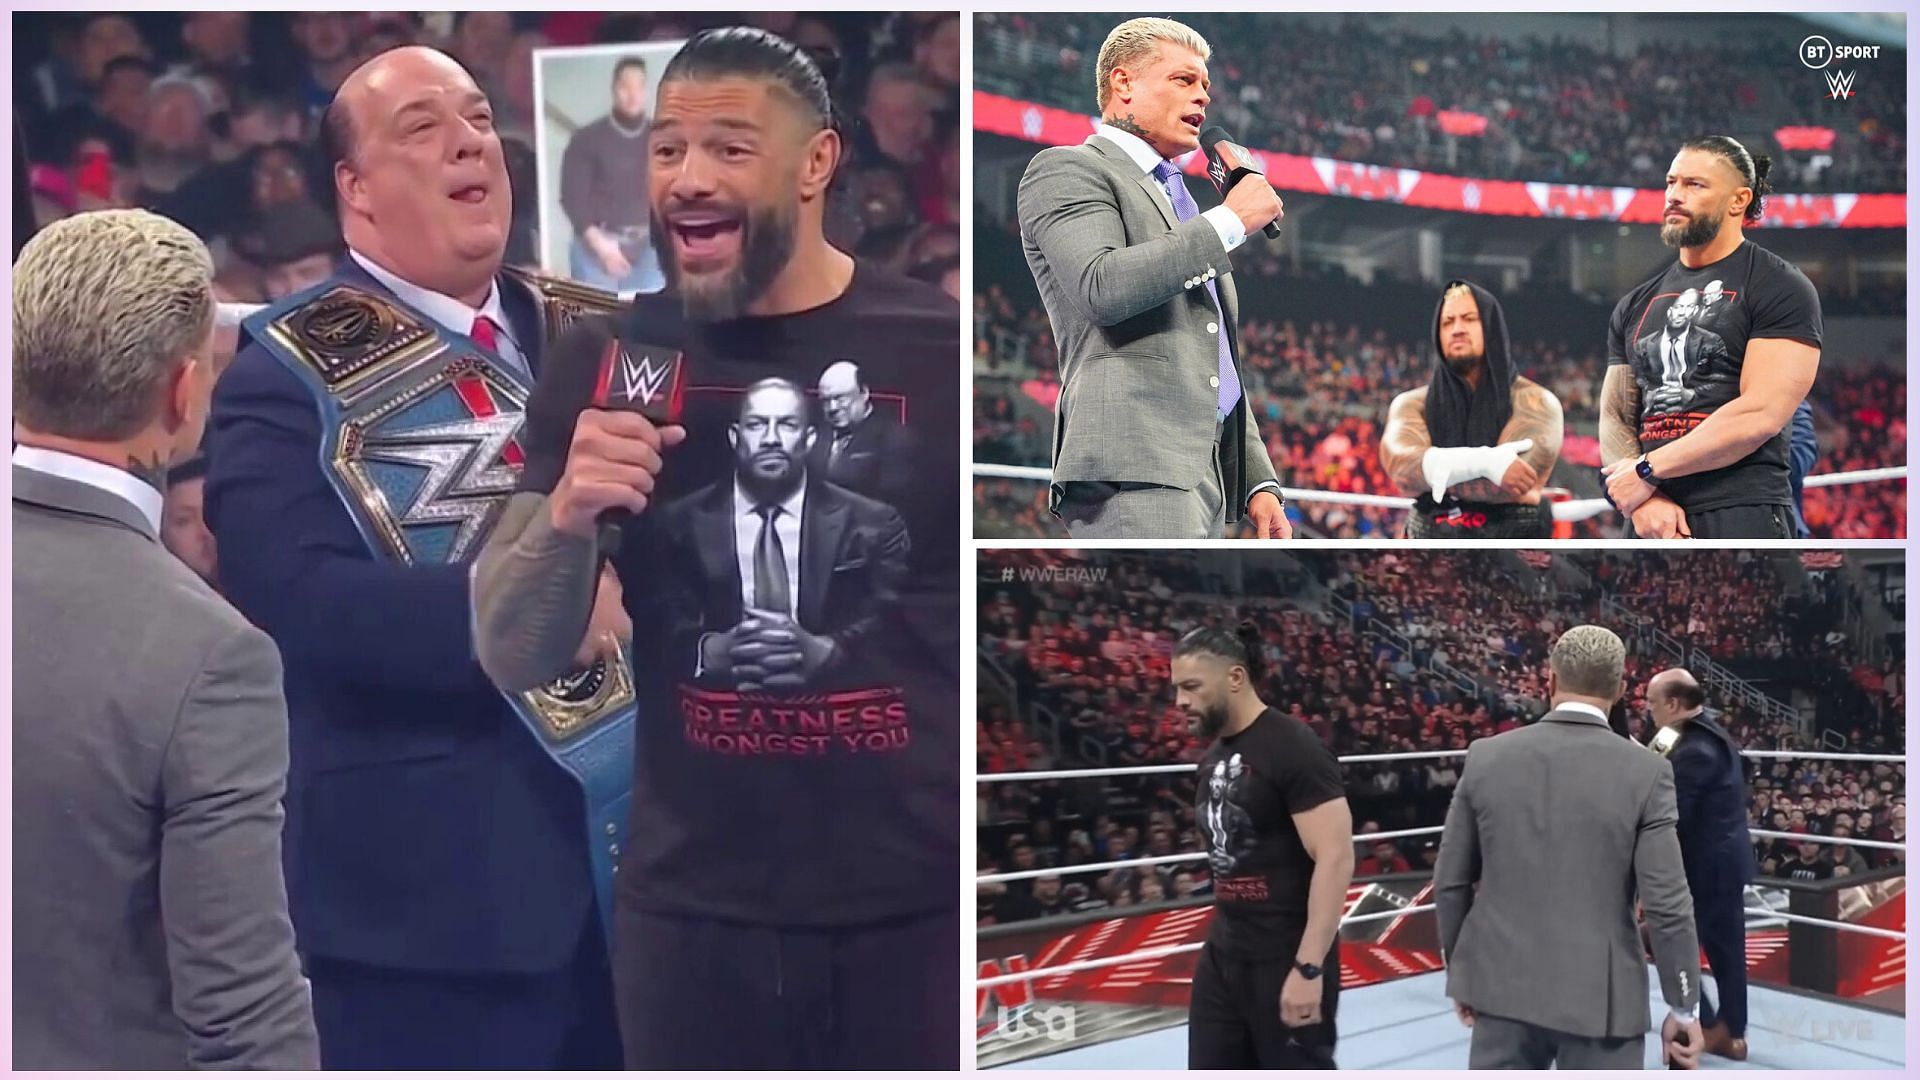 Roman Reigns and Cody Rhodes have a fiery exchange on WWE RAW